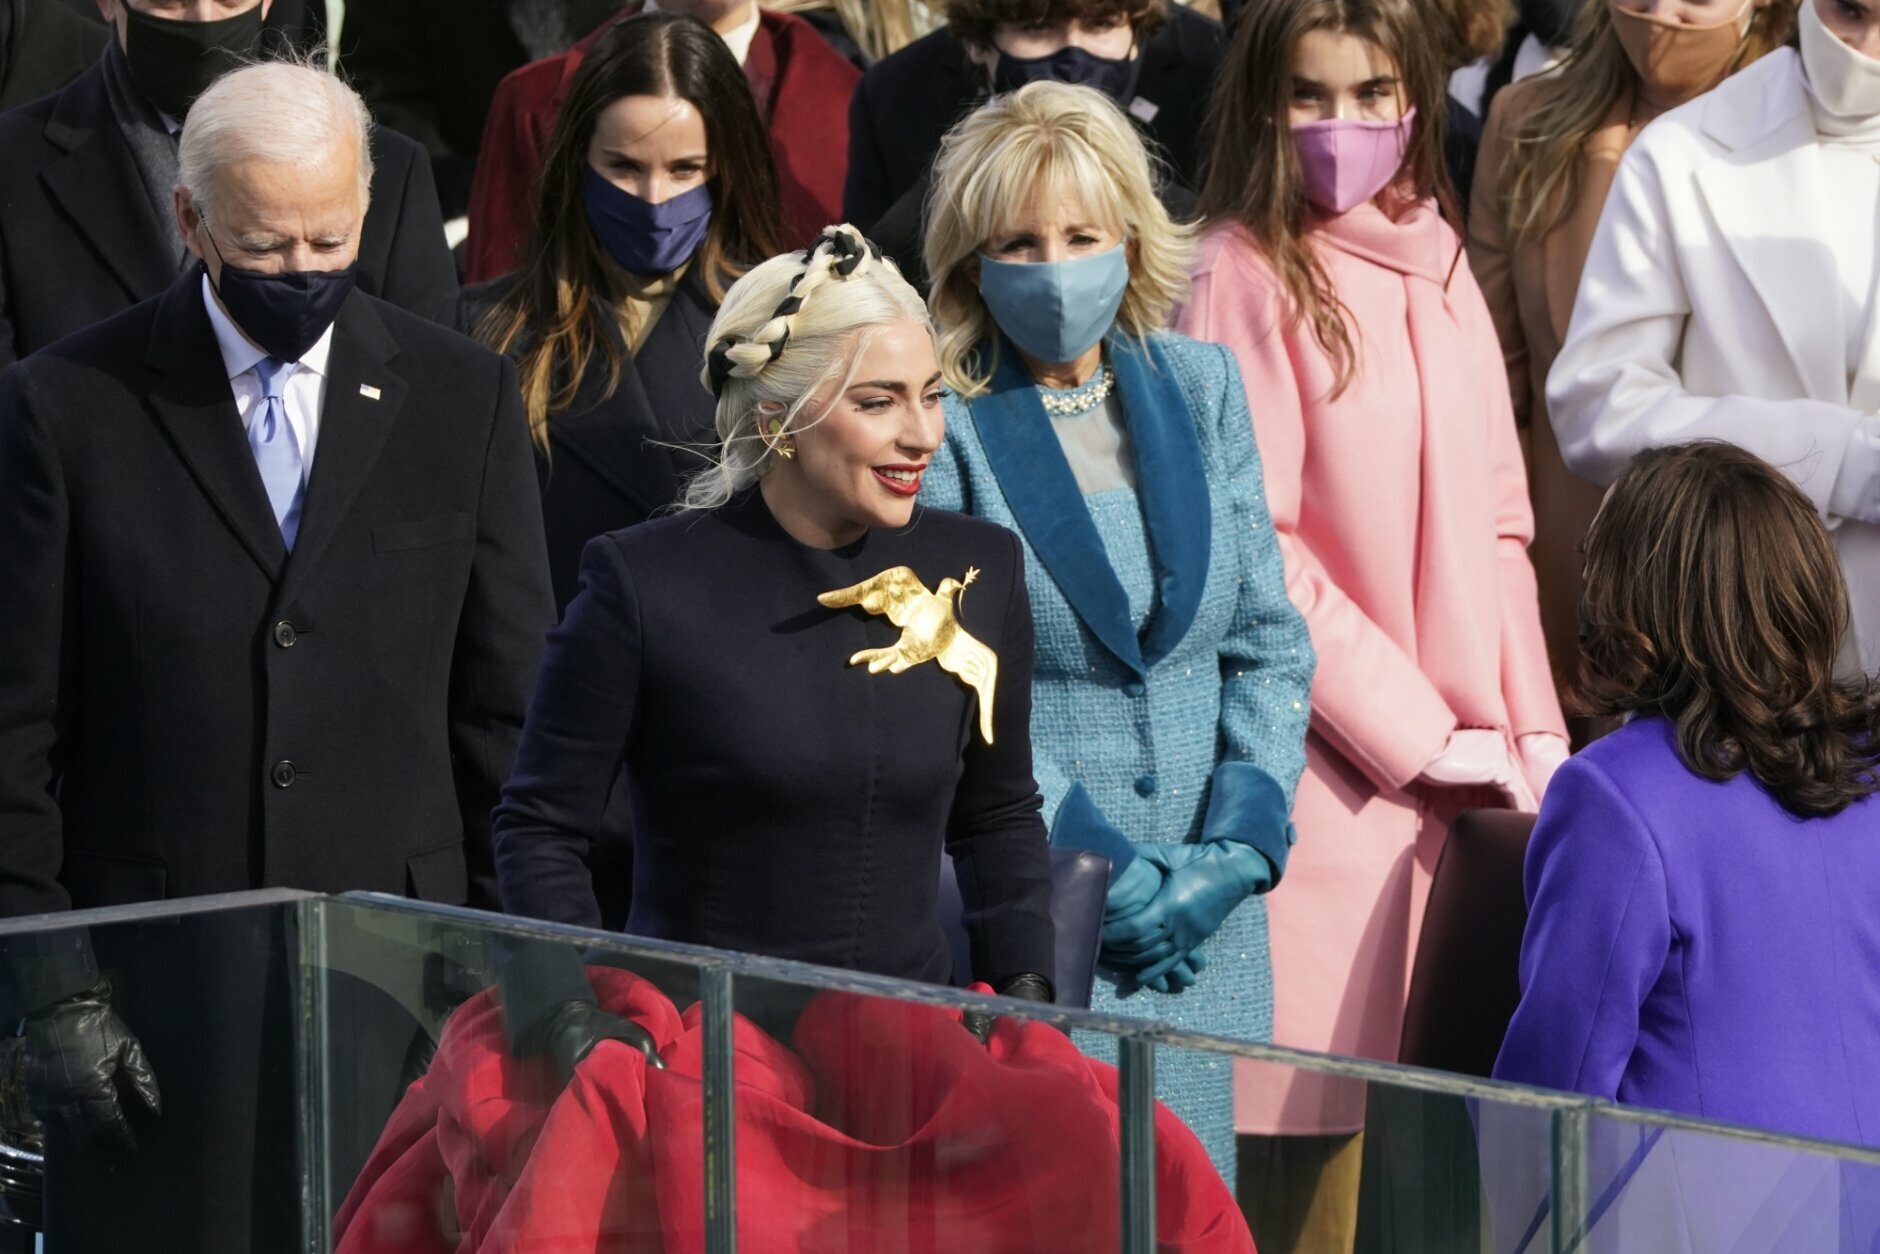 <p>Lady Gaga arrives to sing the National Anthem during the 59th Presidential Inauguration at the U.S. Capitol in Washington, Wednesday, Jan. 20, 2021. (AP Photo/Andrew Harnik)</p>
